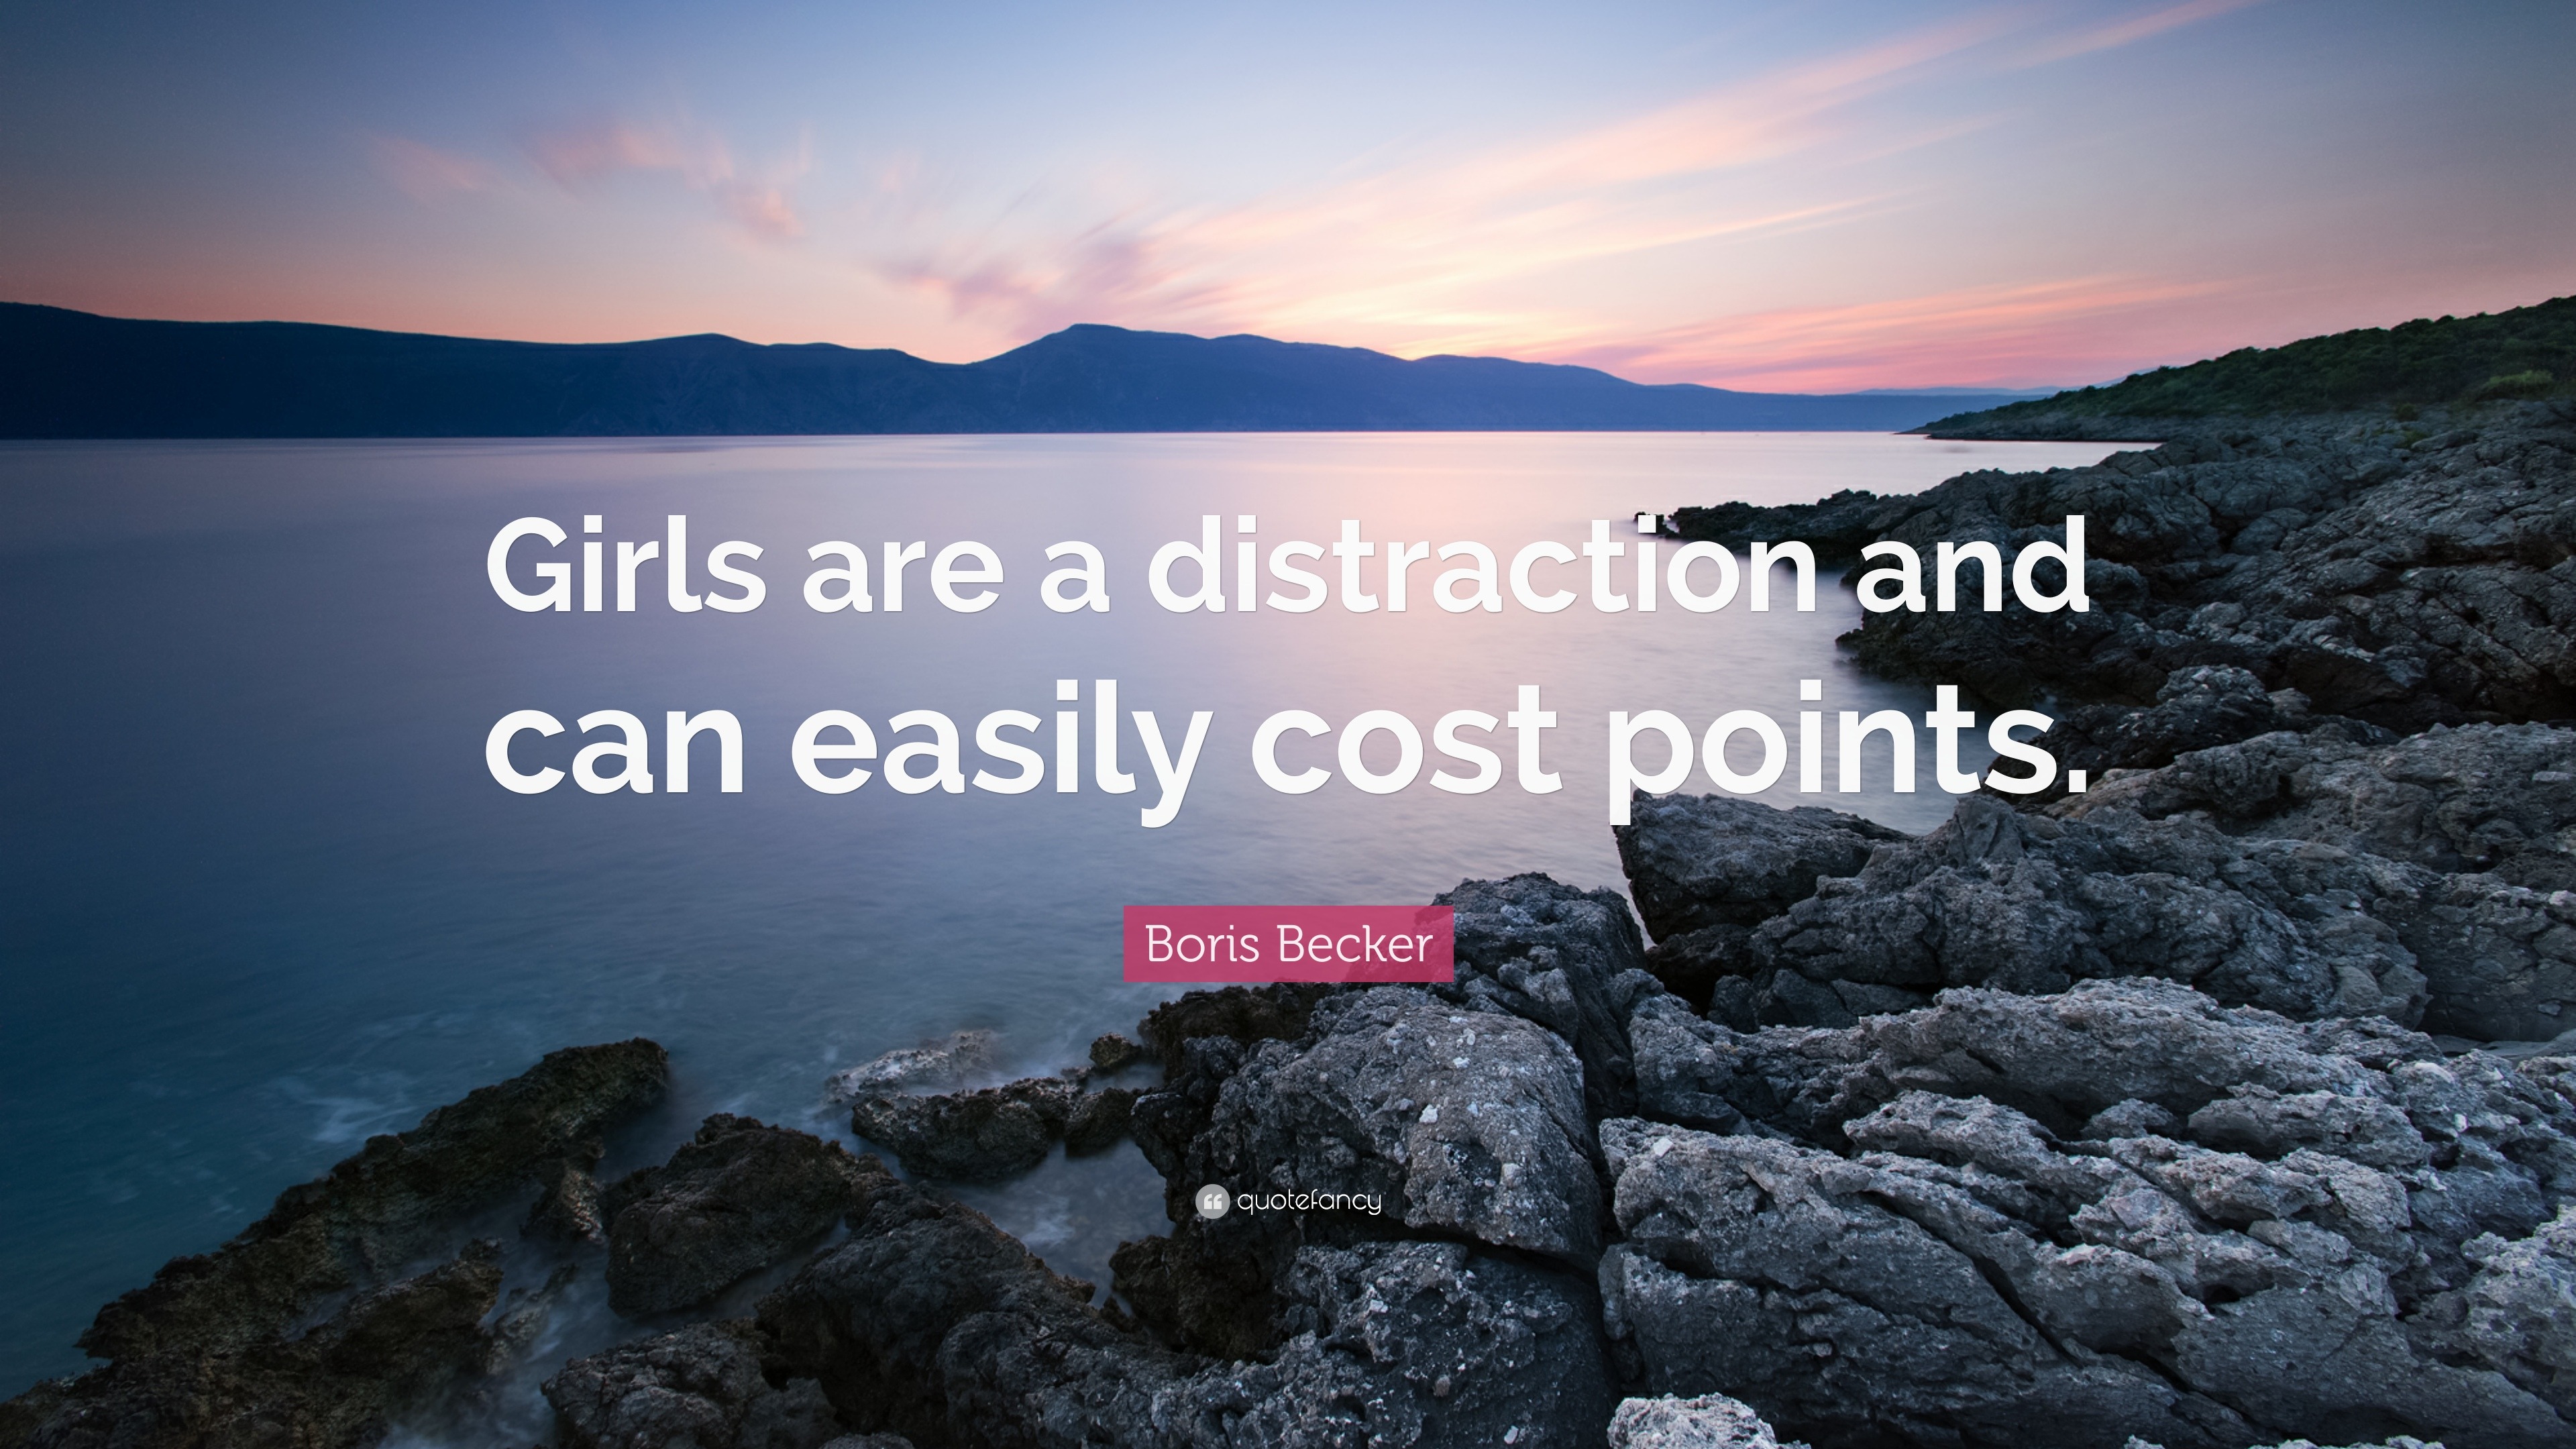 Boris Becker quote: Girls are a distraction and can easily cost